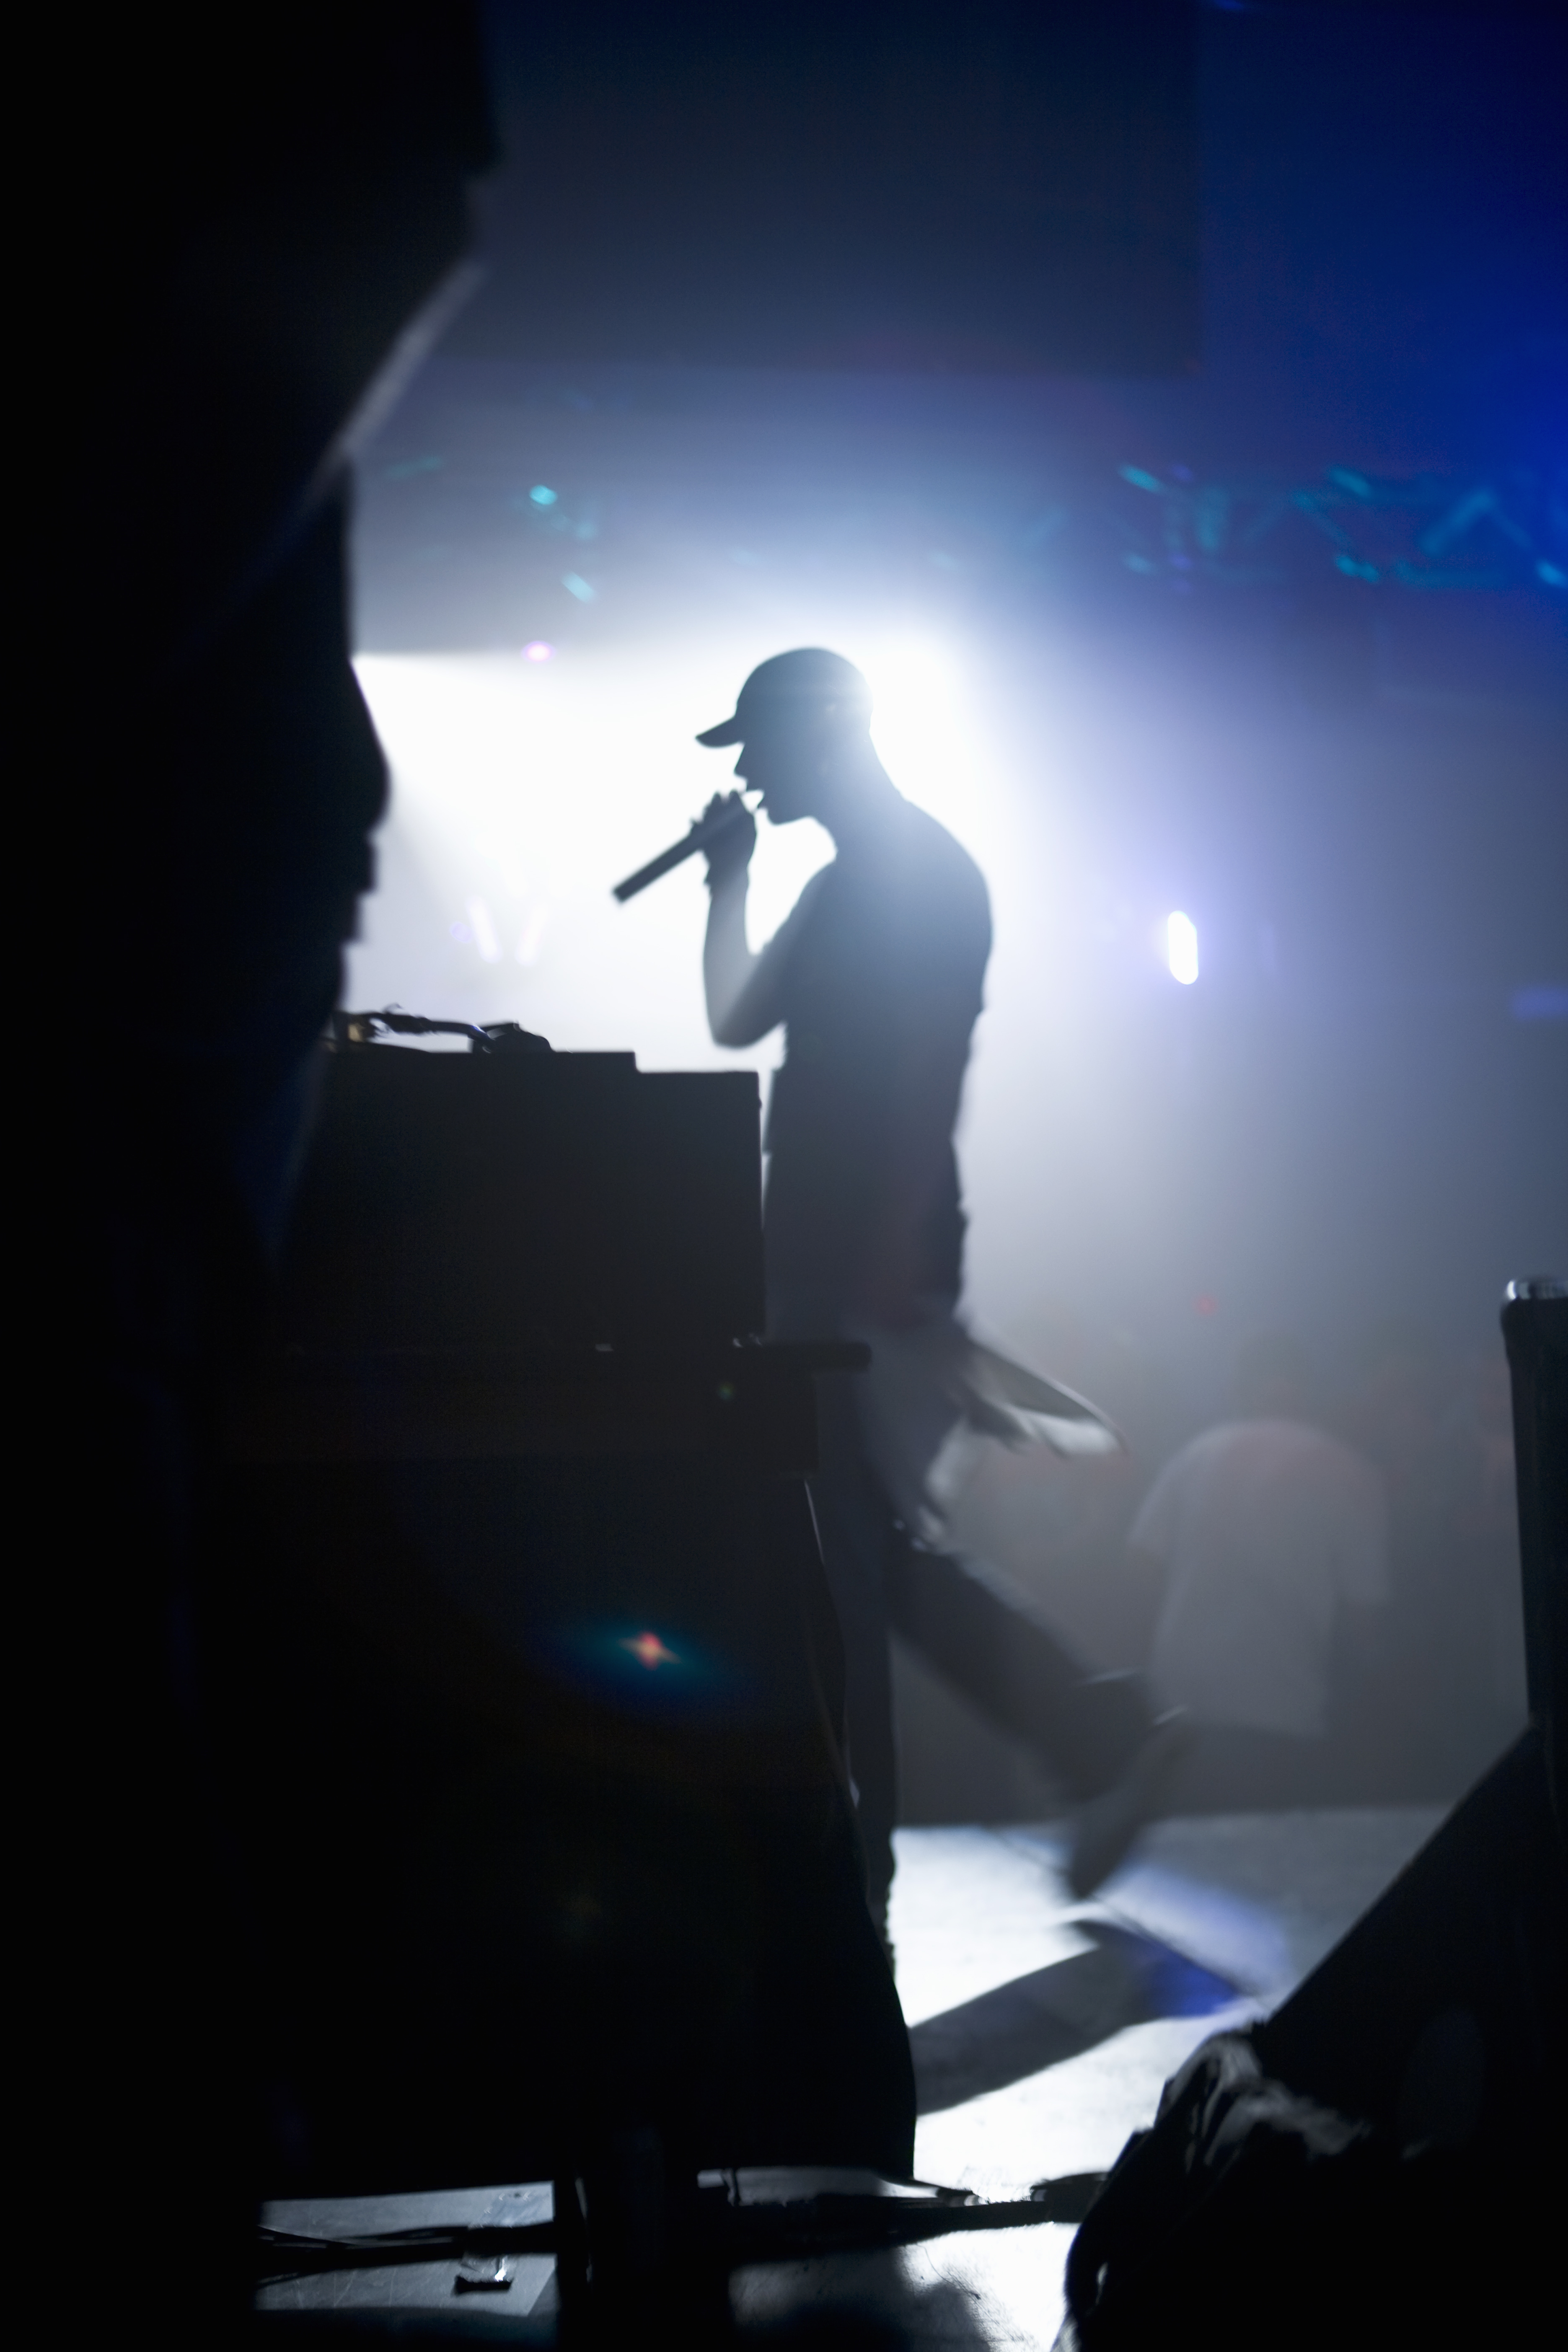 Silhouette of singer on stage